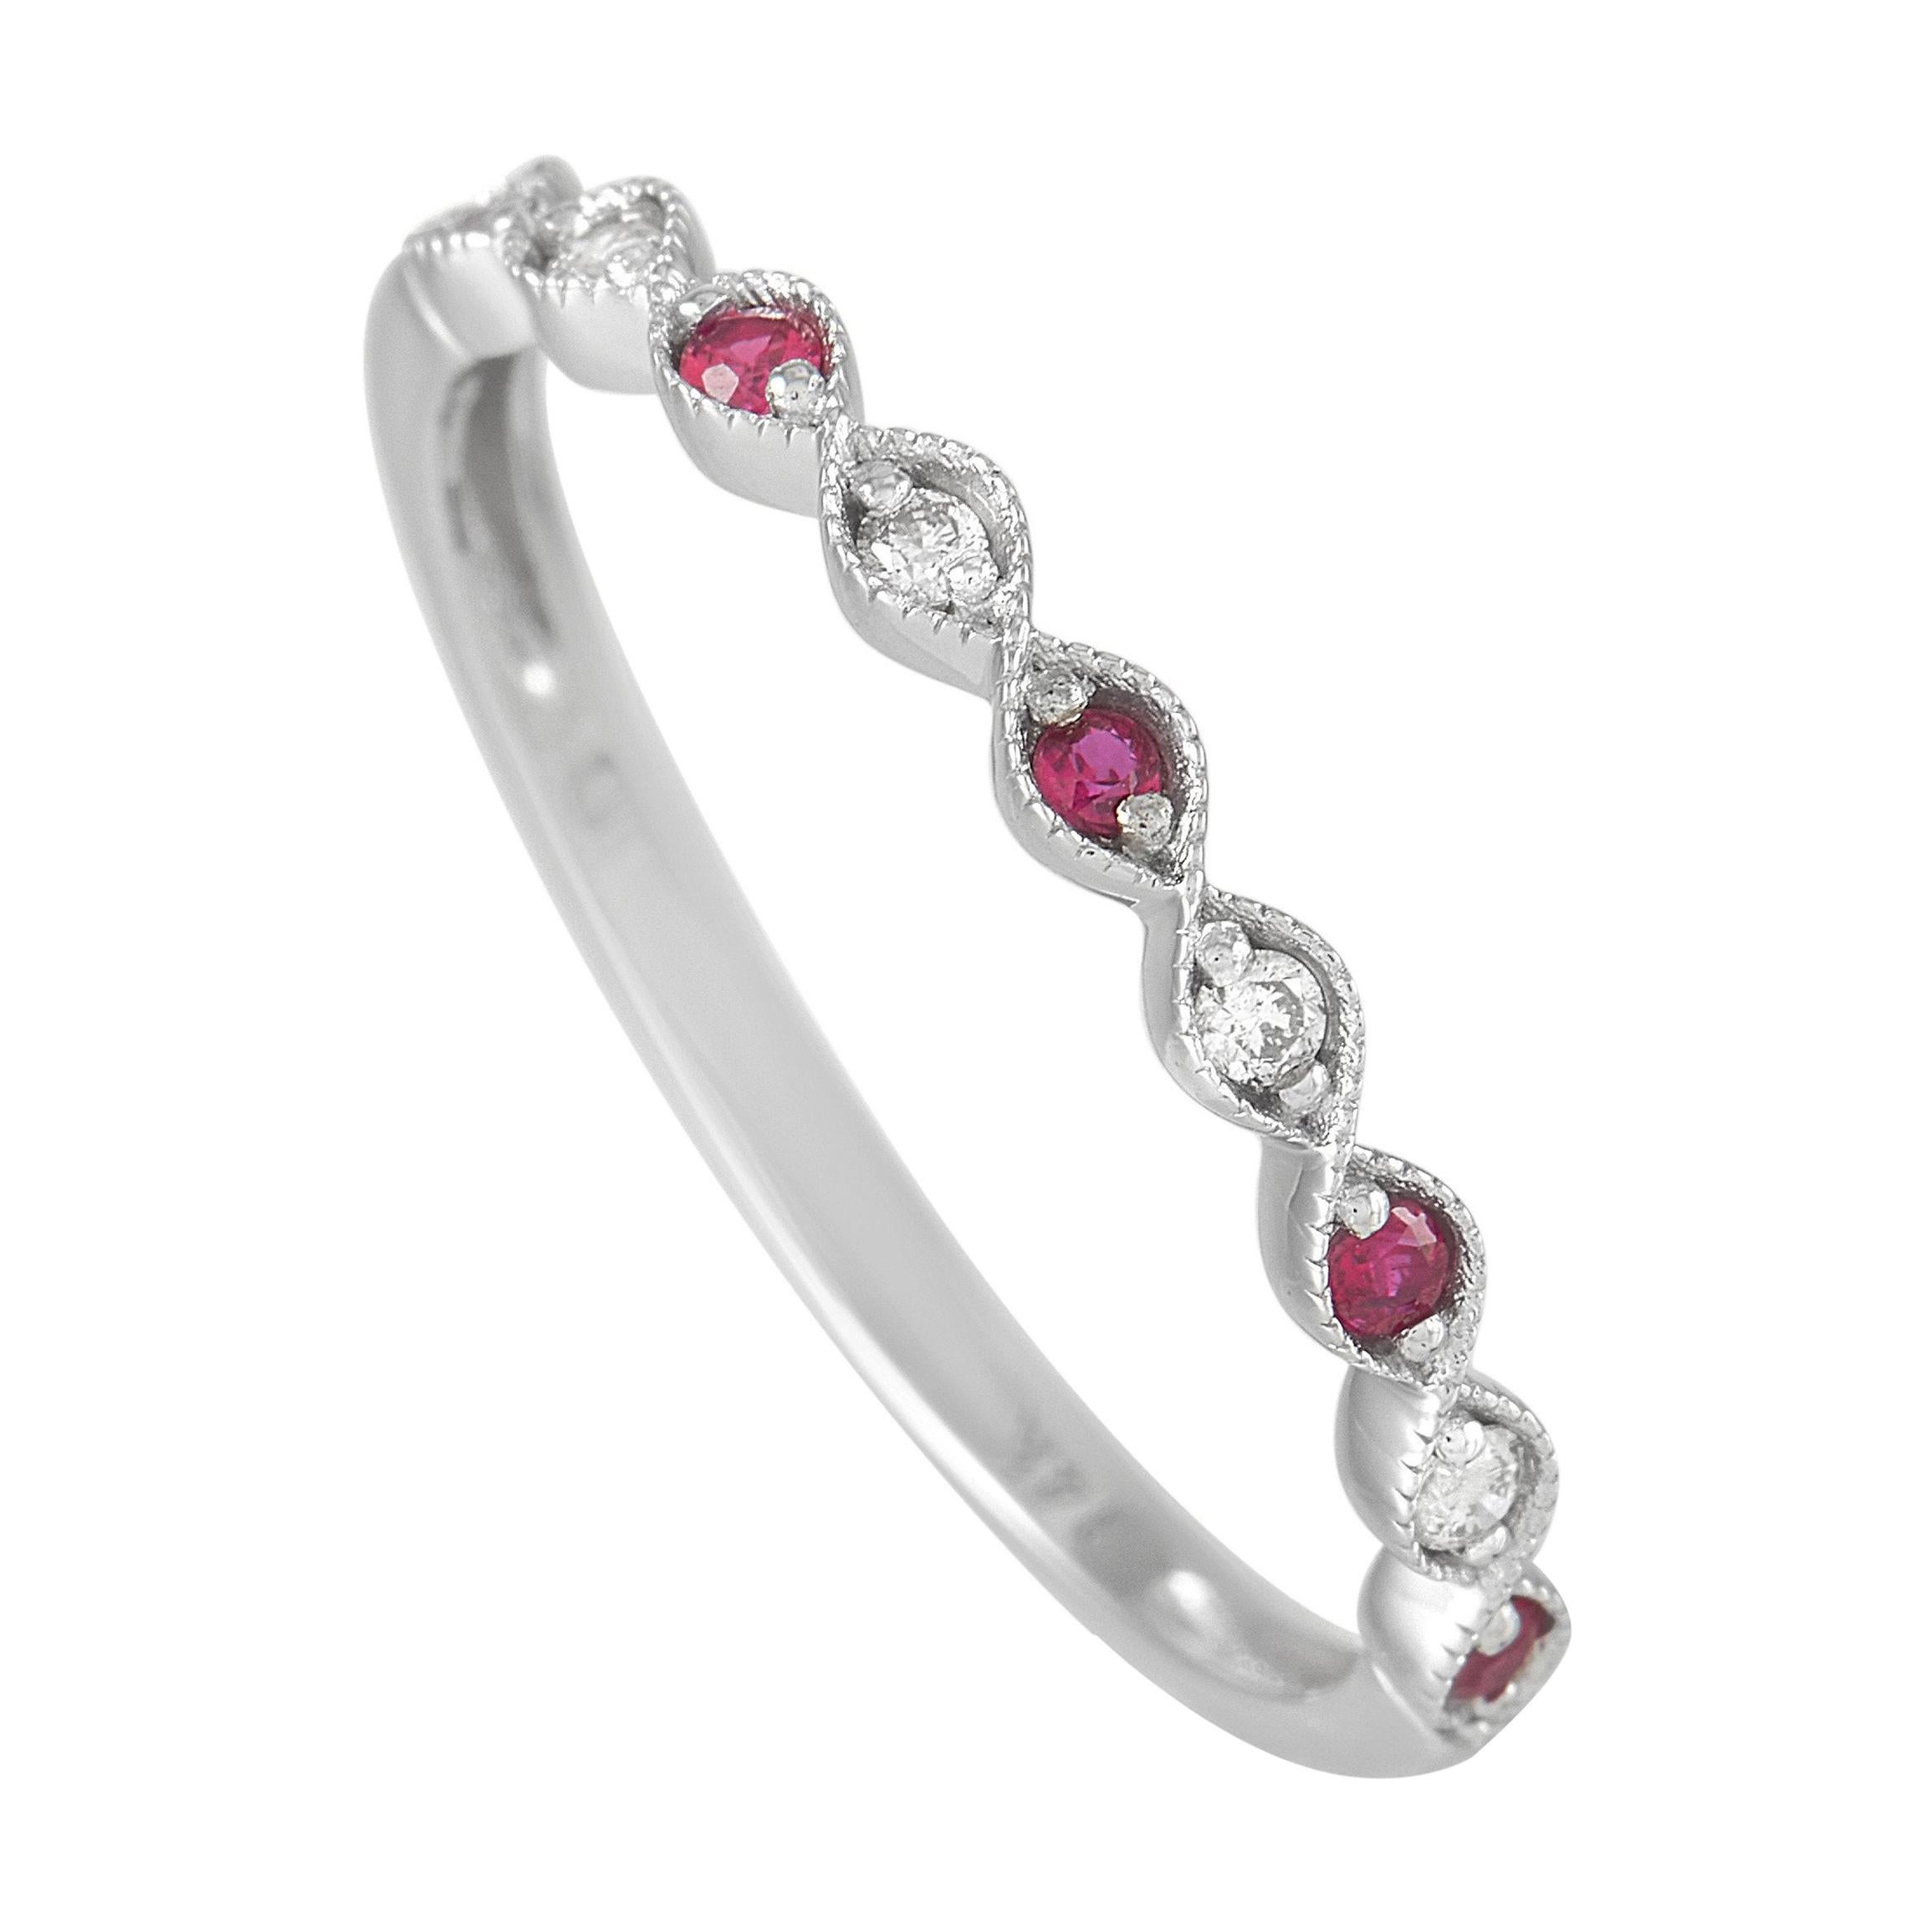 LB Exclusive 14K White Gold 0.06 Ct Diamond and Ruby Ring